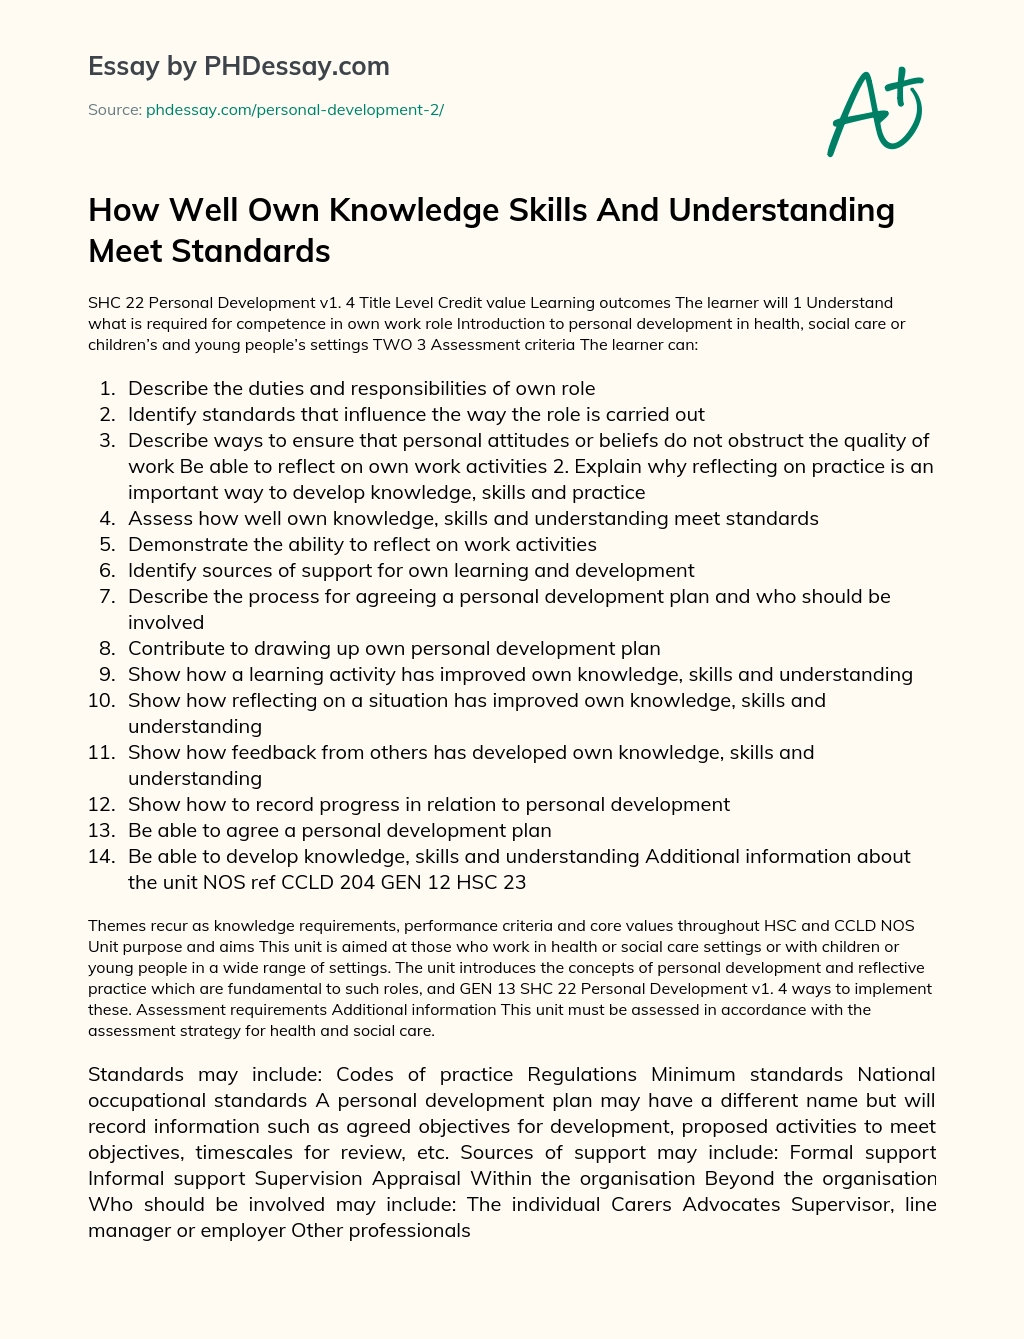 How Well Own Knowledge Skills And Understanding Meet Standards essay